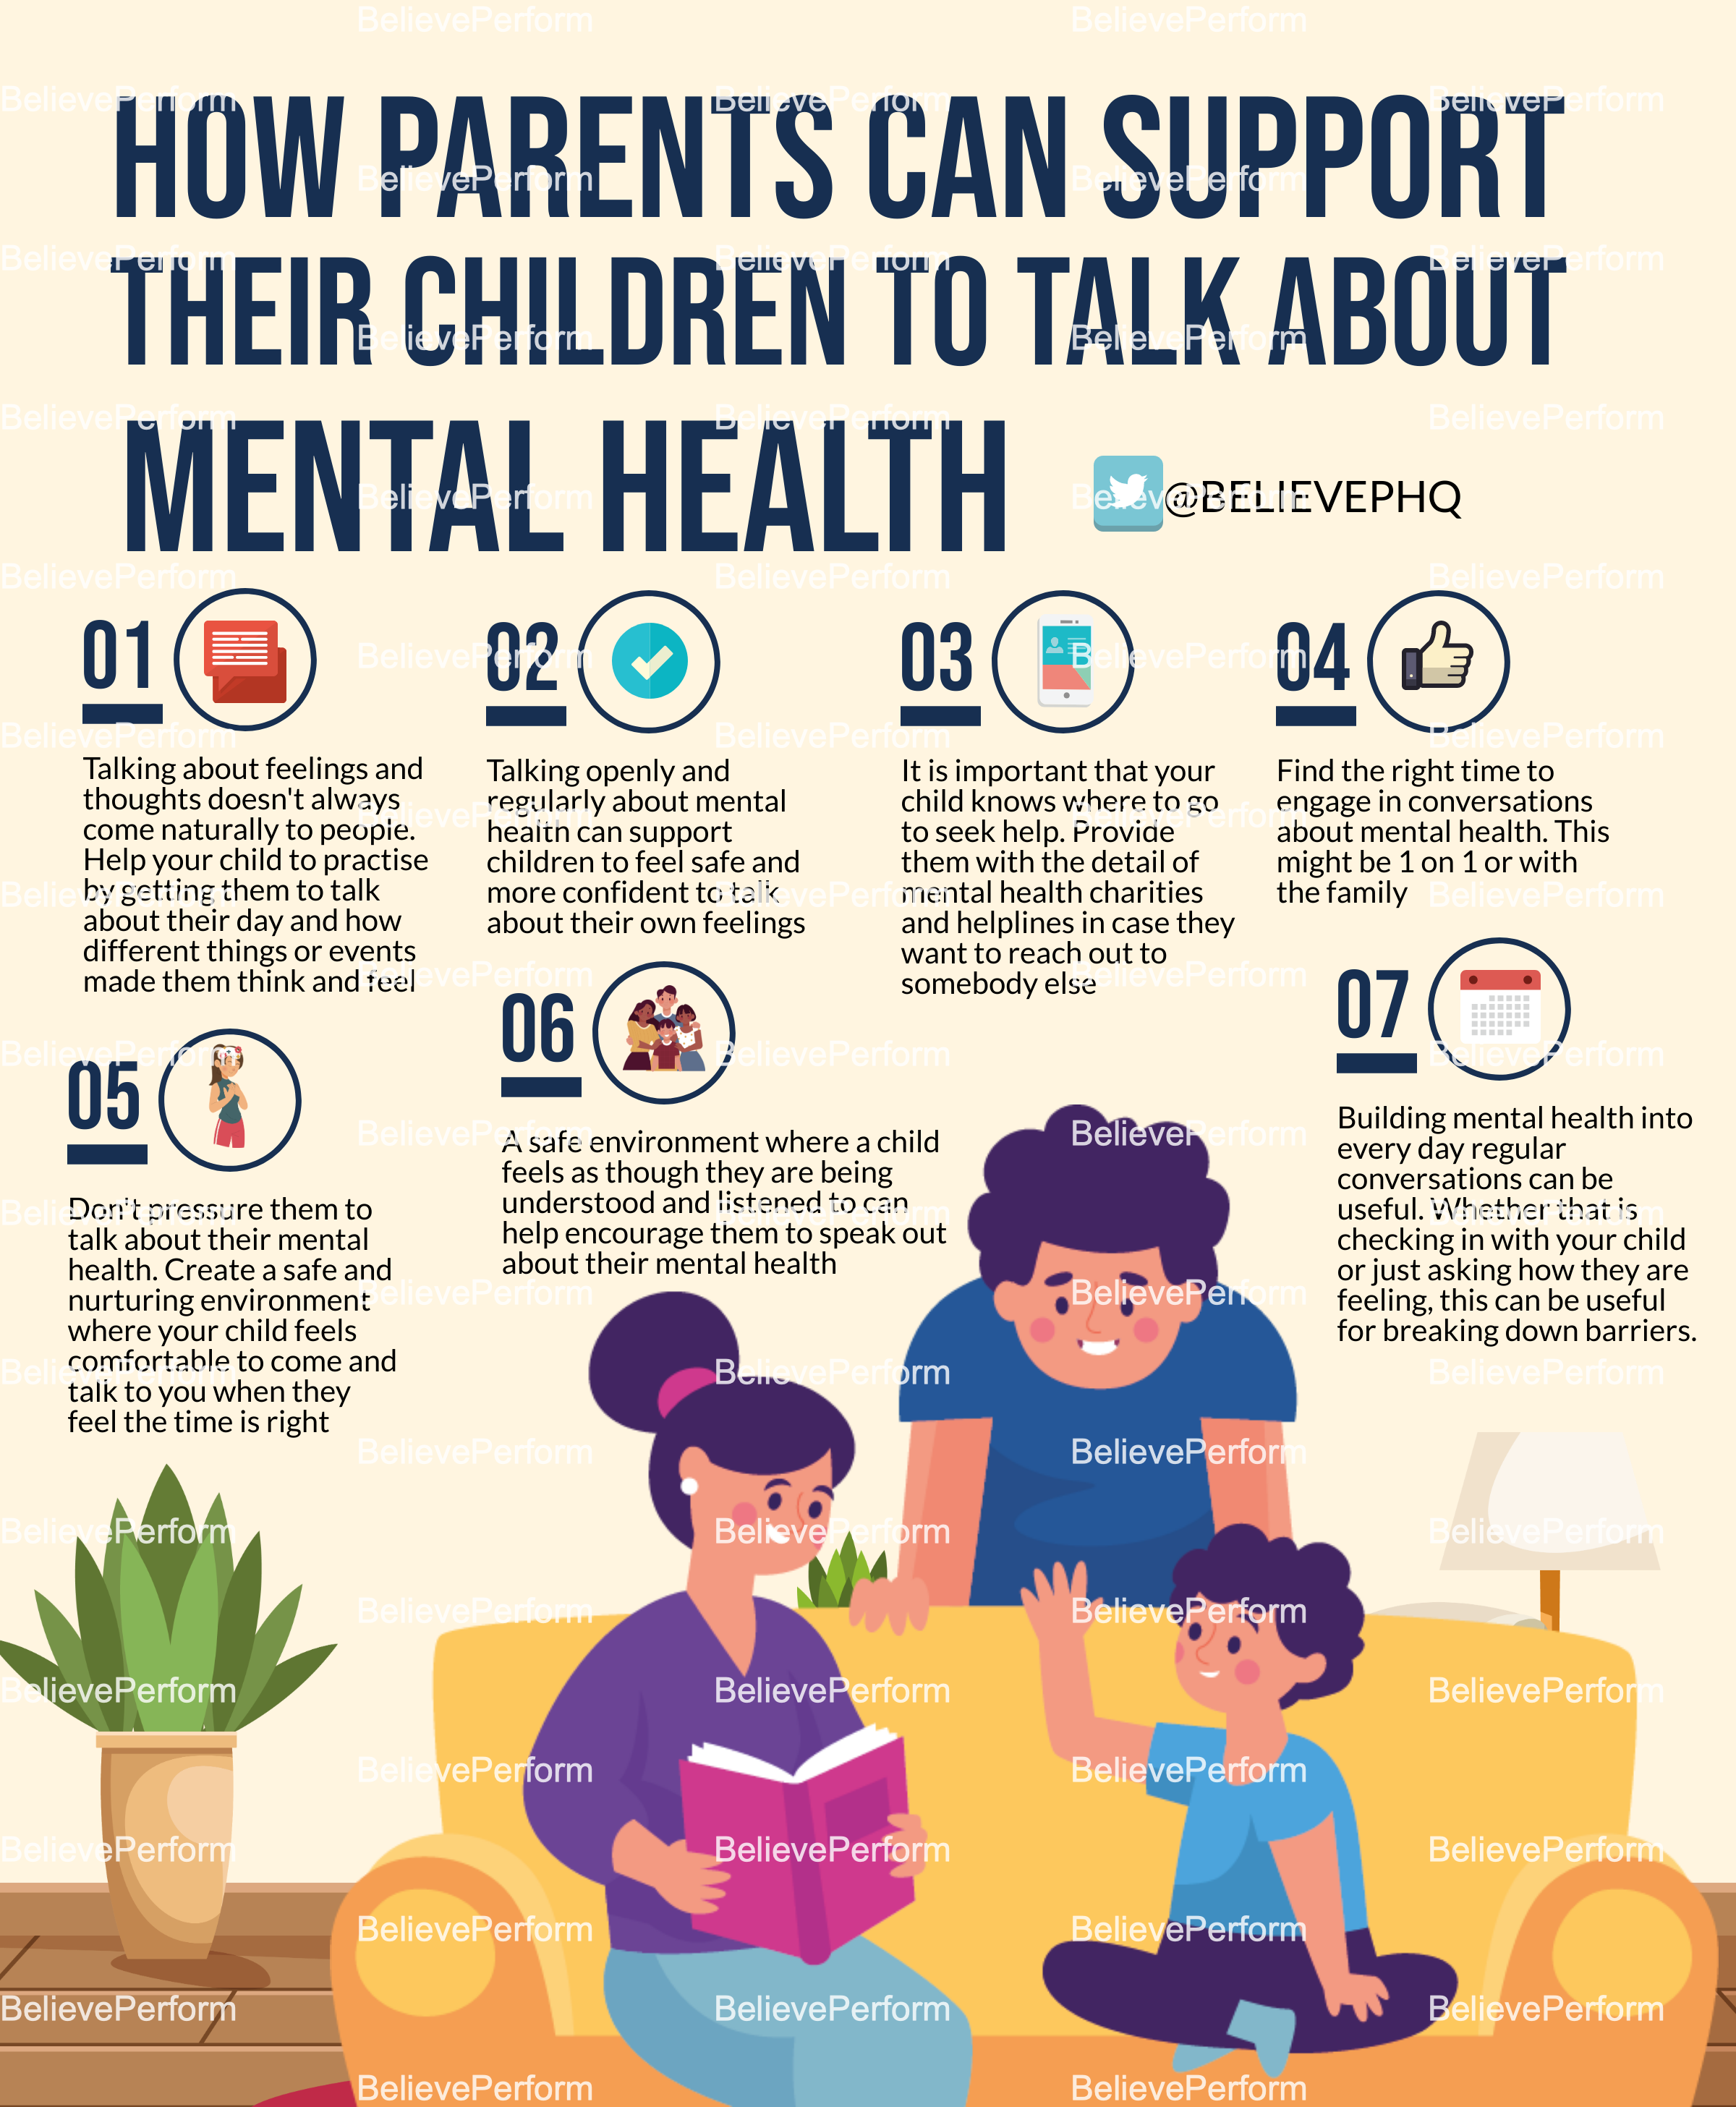 How parents can support their children to talk about